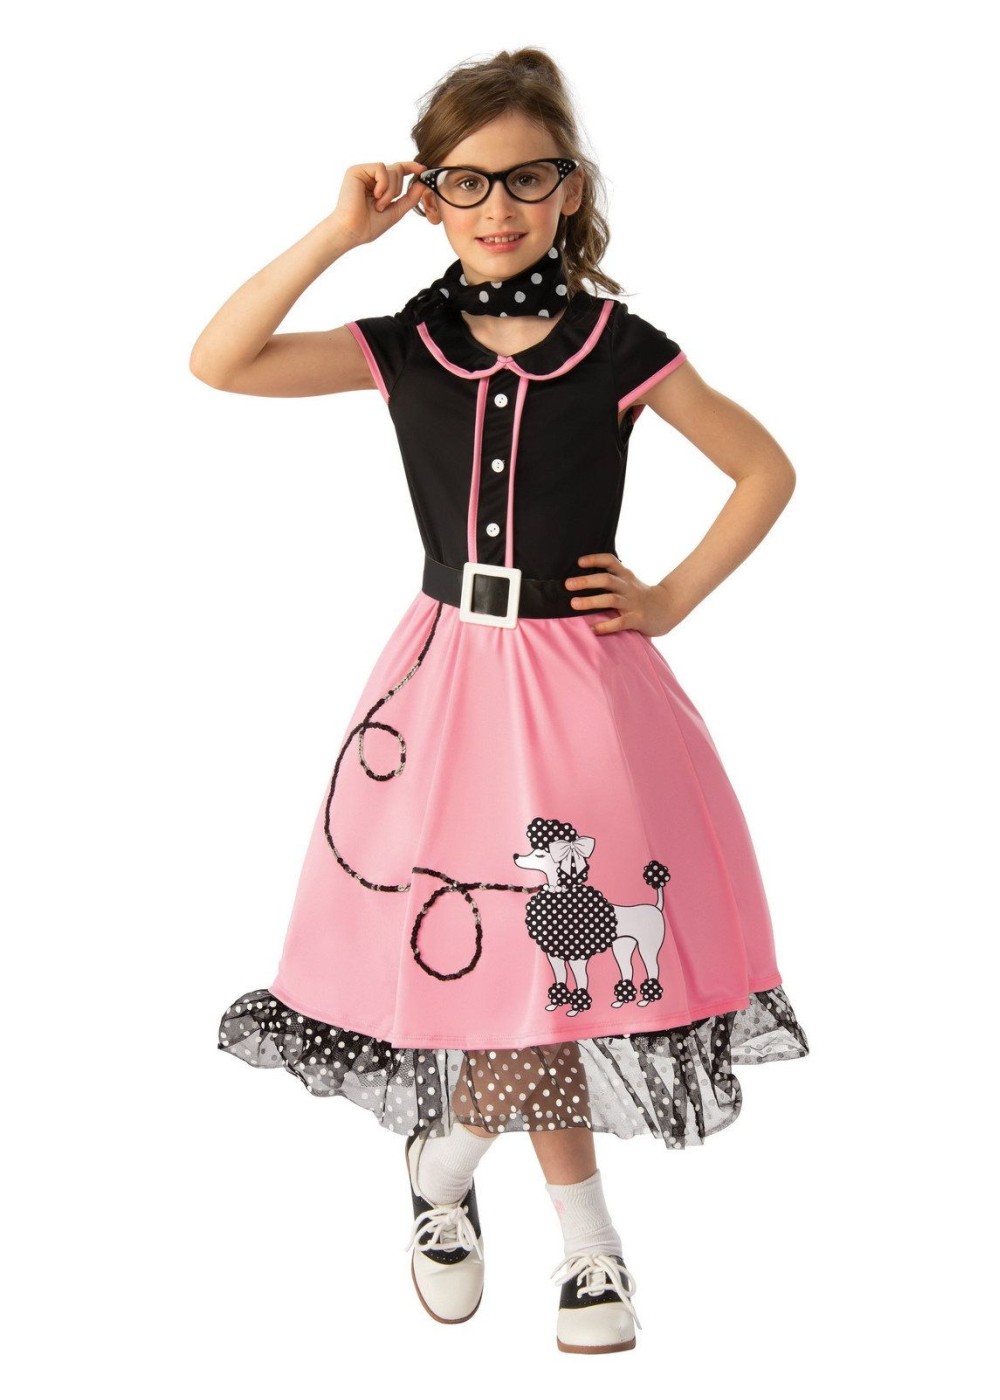 Girls Poodle Skirt Sweetheart Costume - Accessories